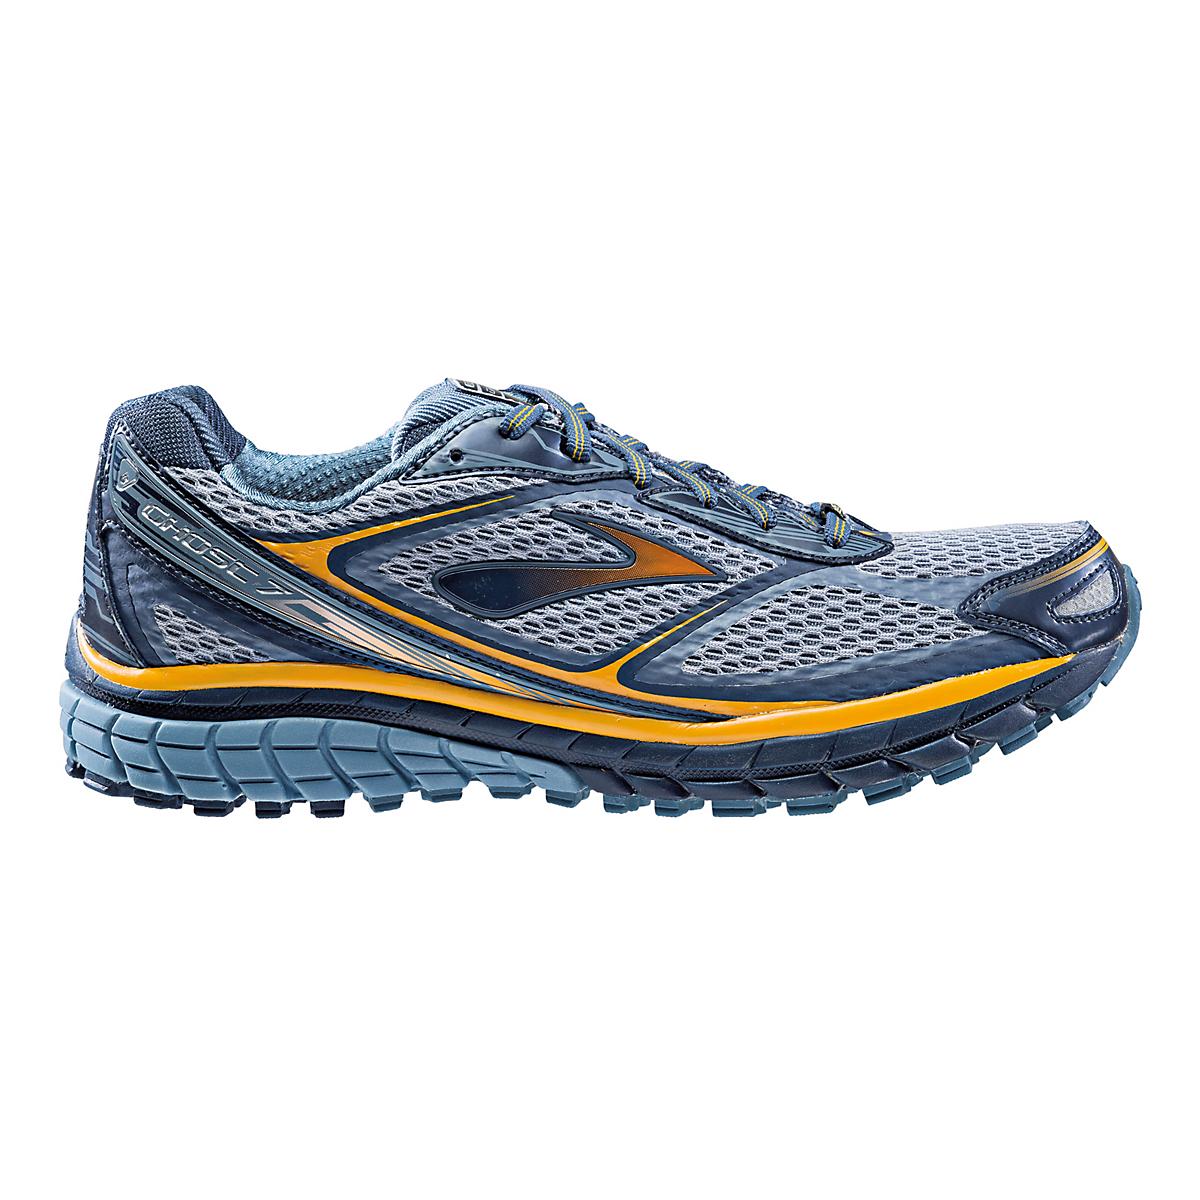 Mens Brooks Ghost 7 Running Shoe at Road Runner Sports